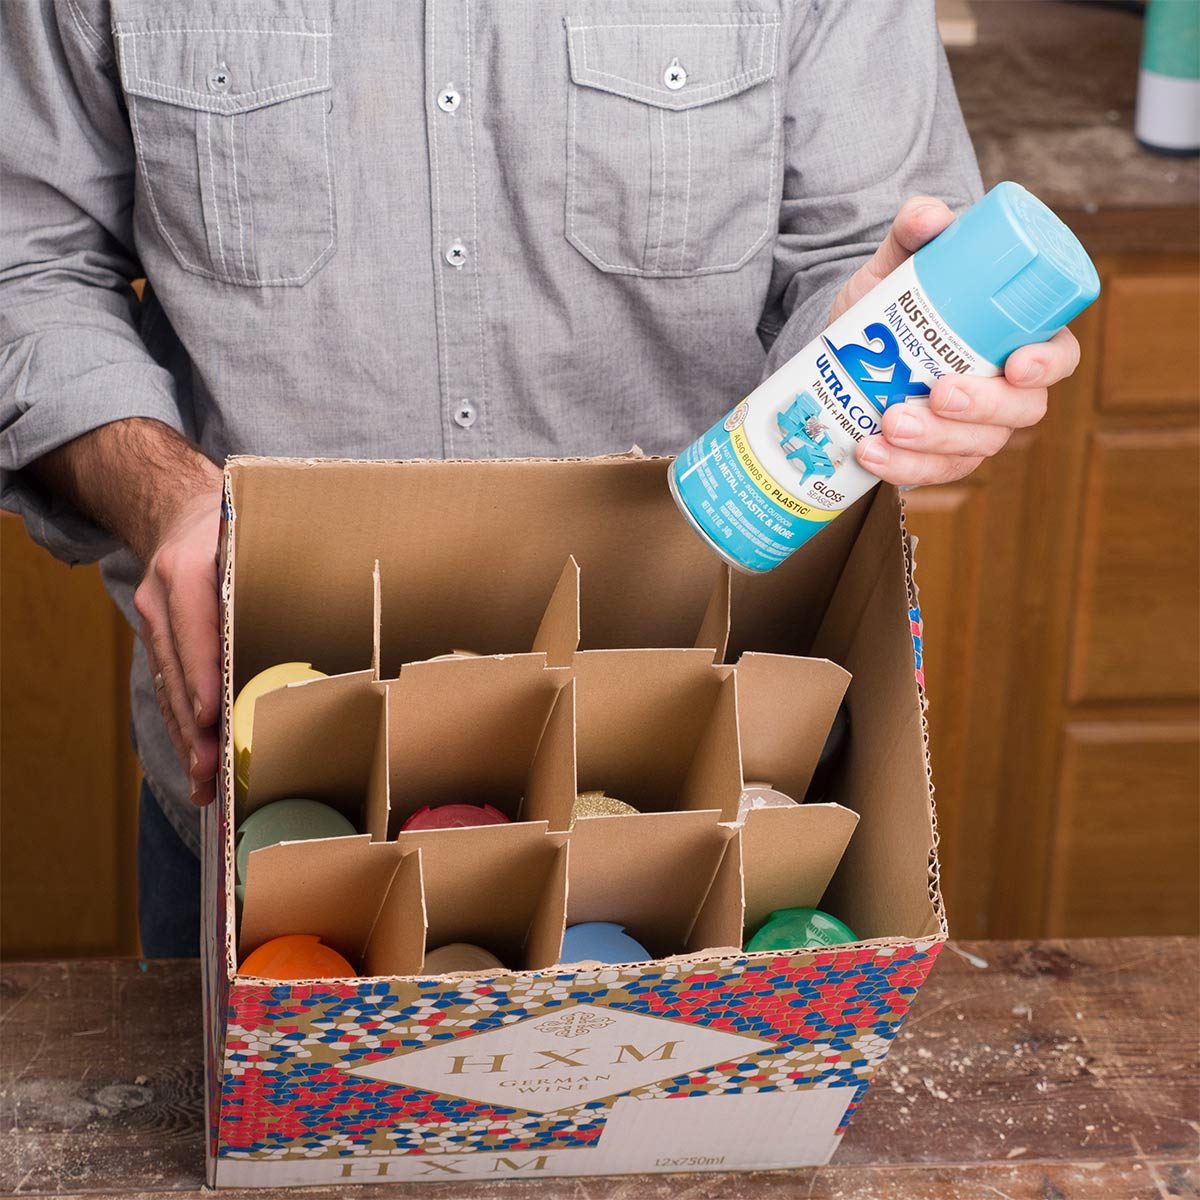 12 Brilliant Ways to Reuse Cardboard Boxes